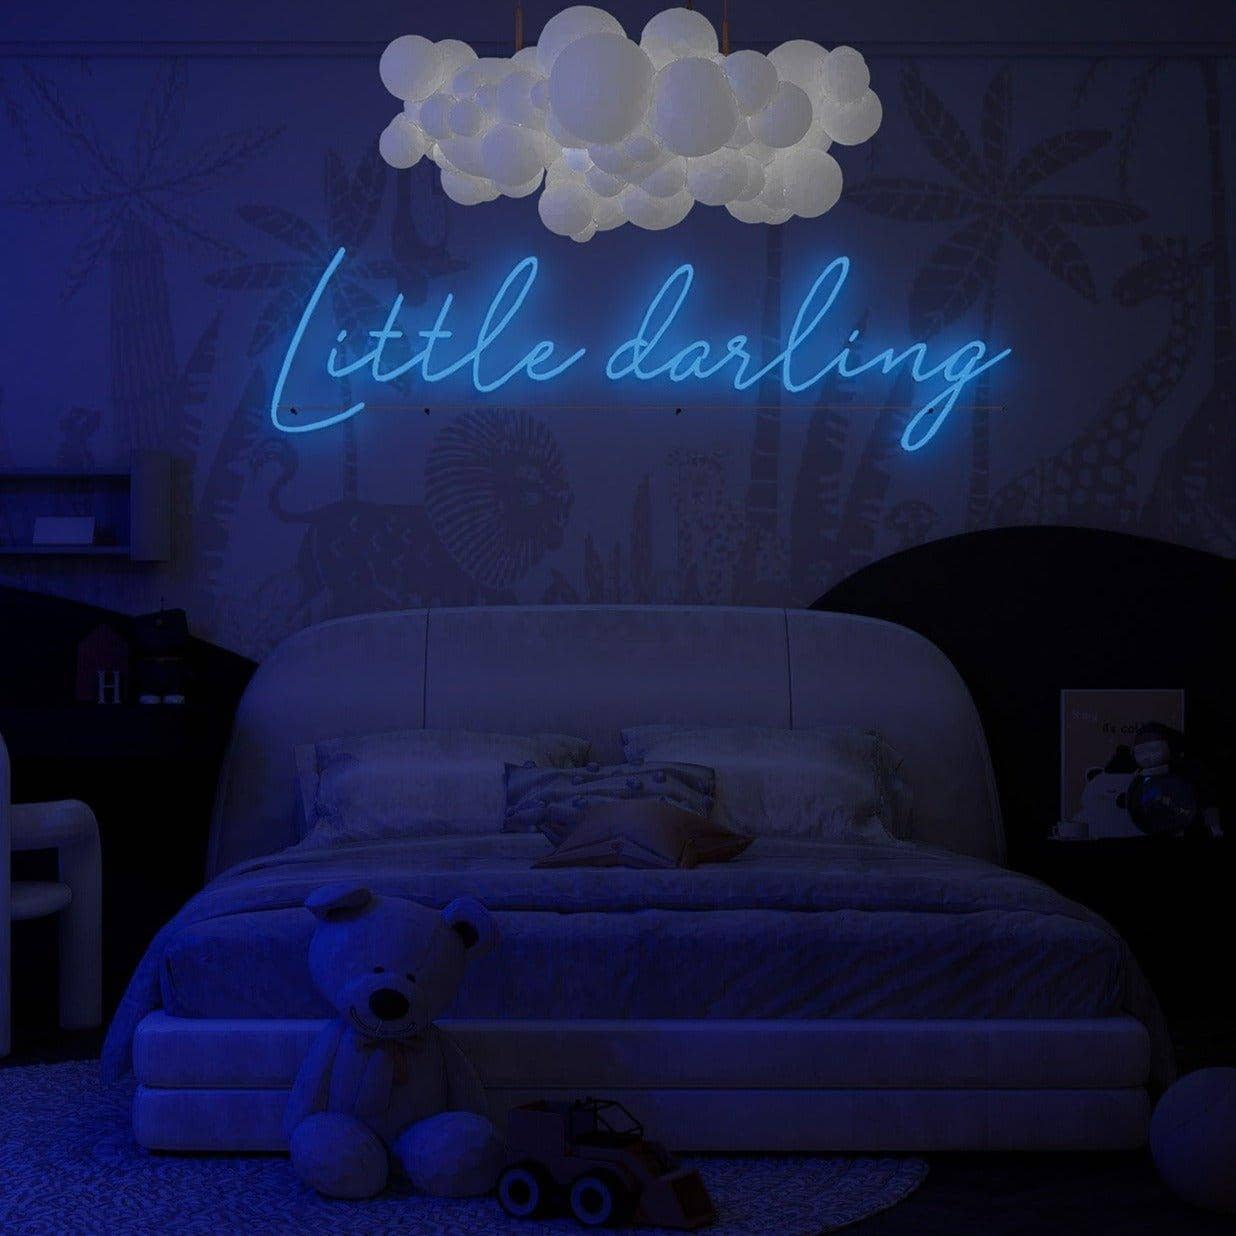 light-up-blue-neon-lights-hanging-on-the-wall-for-display-little-darling